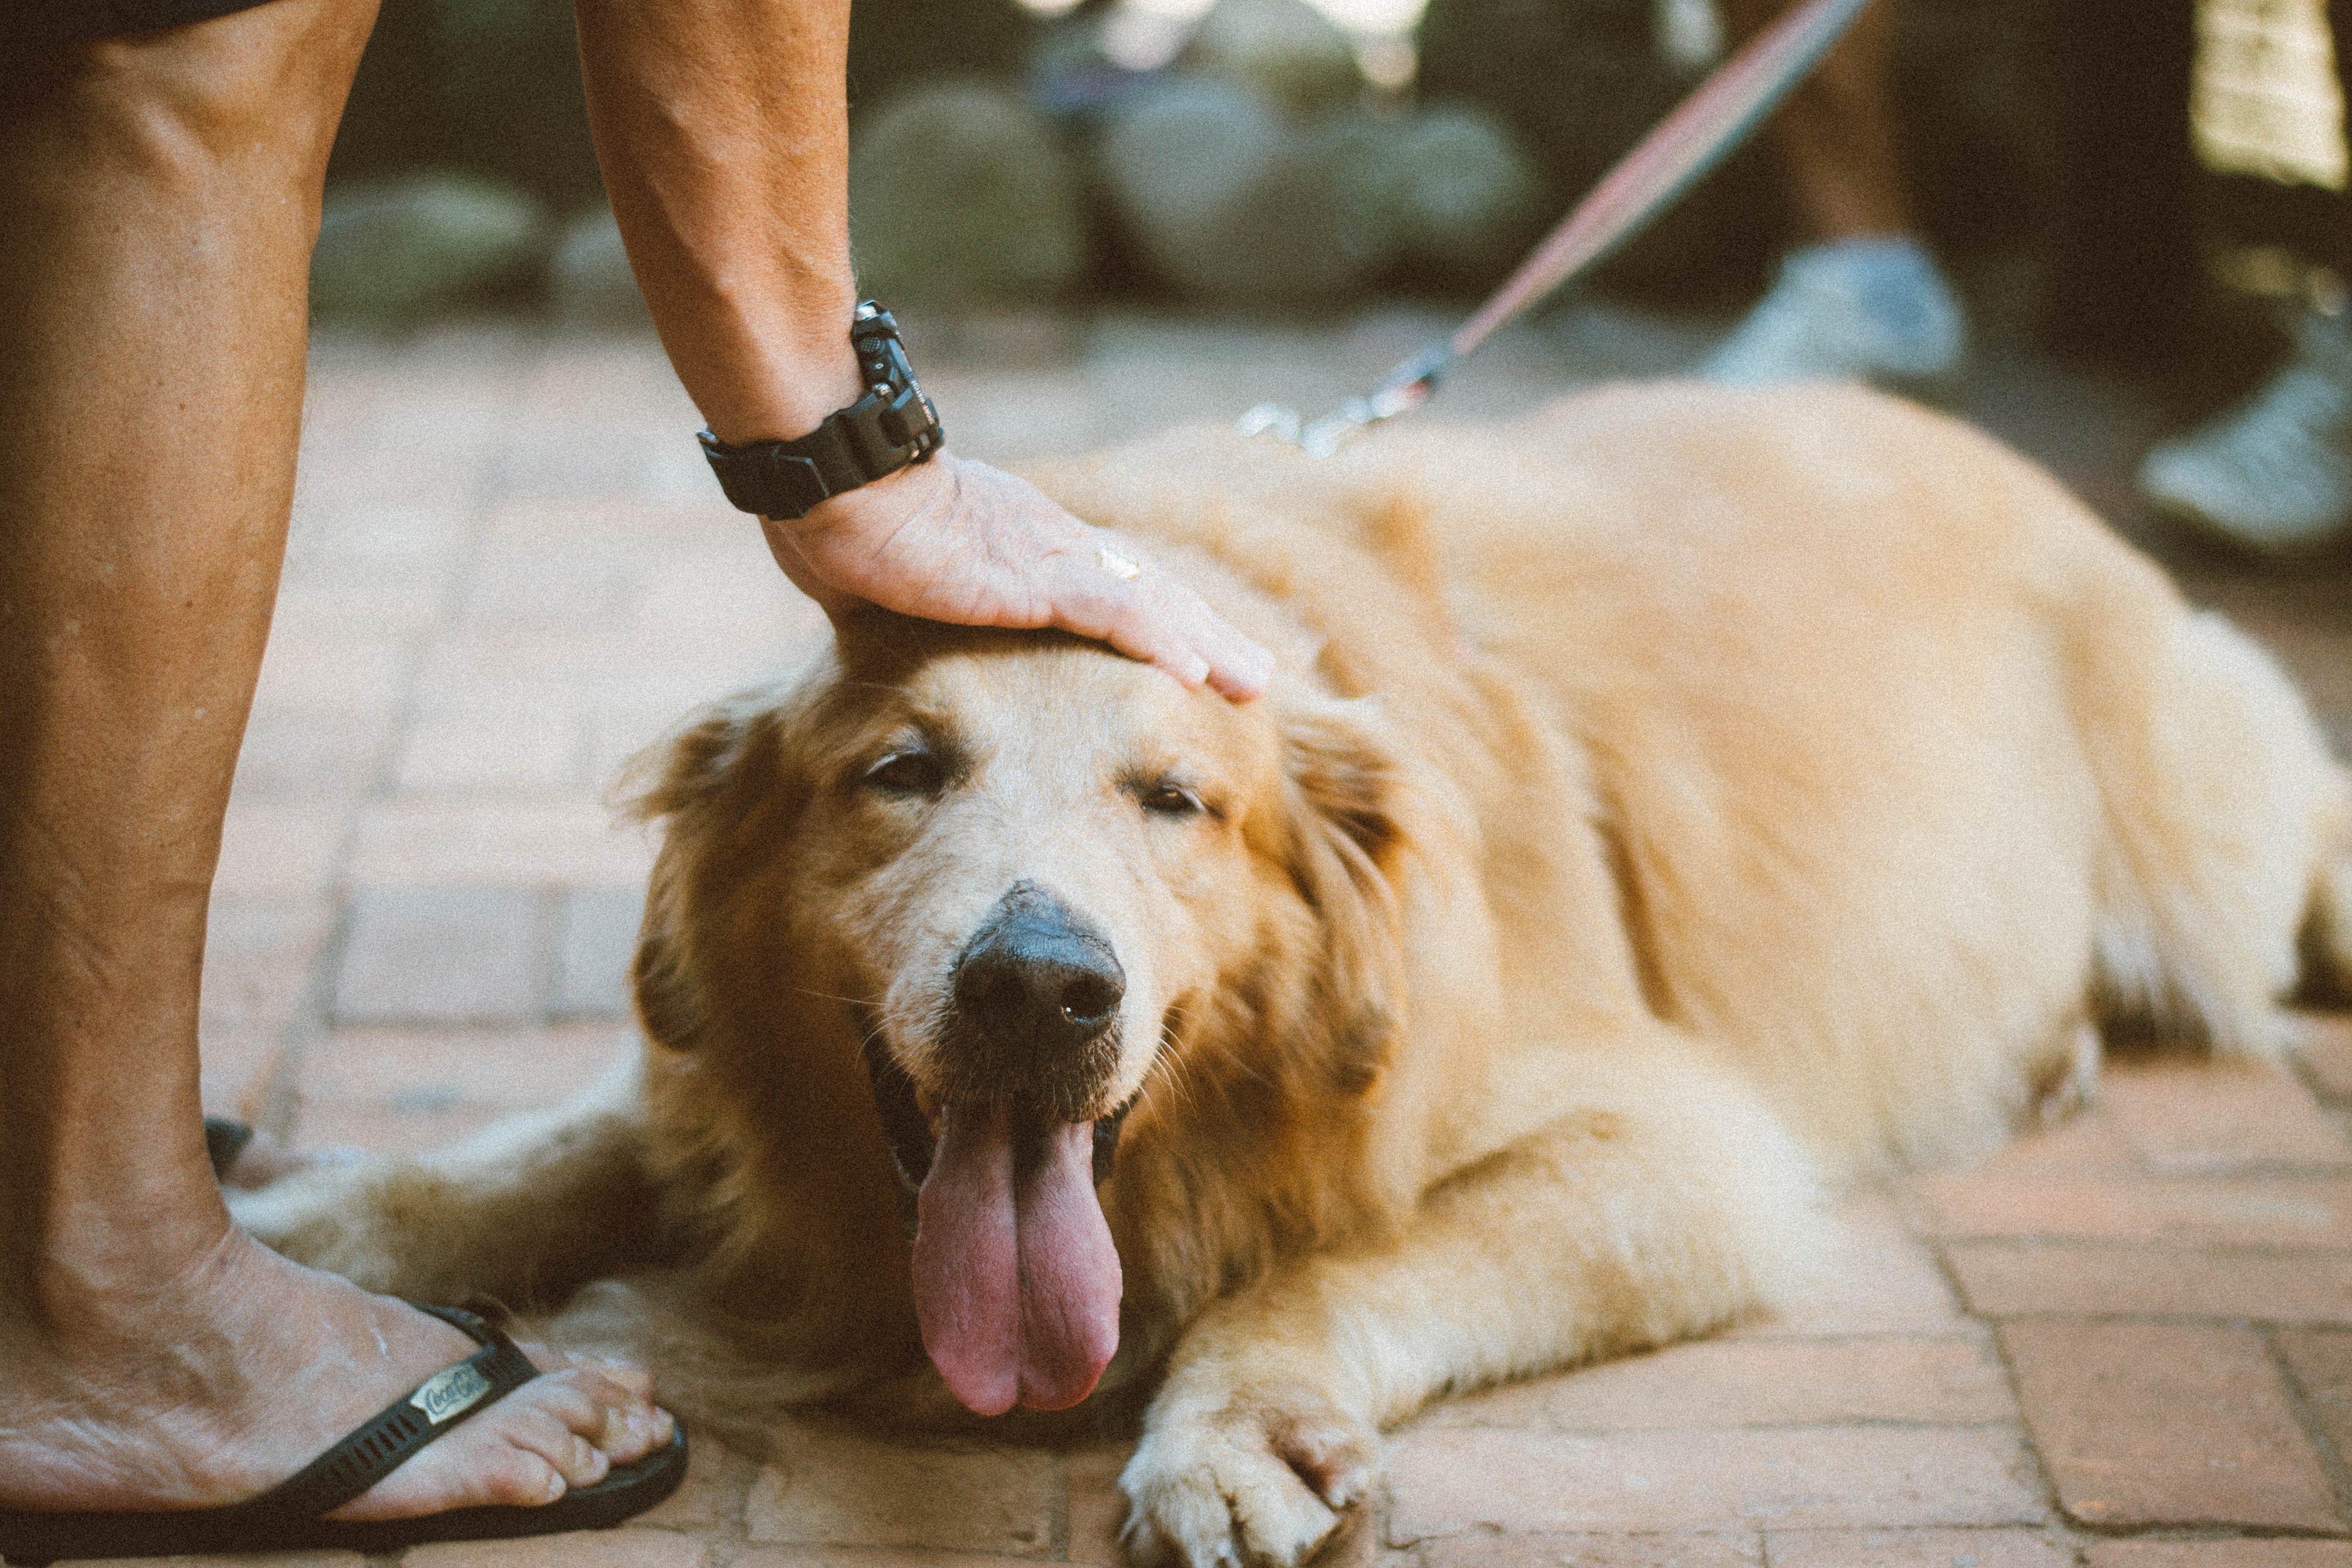 A golden retriever being petted on the head. | Photo: Pexels